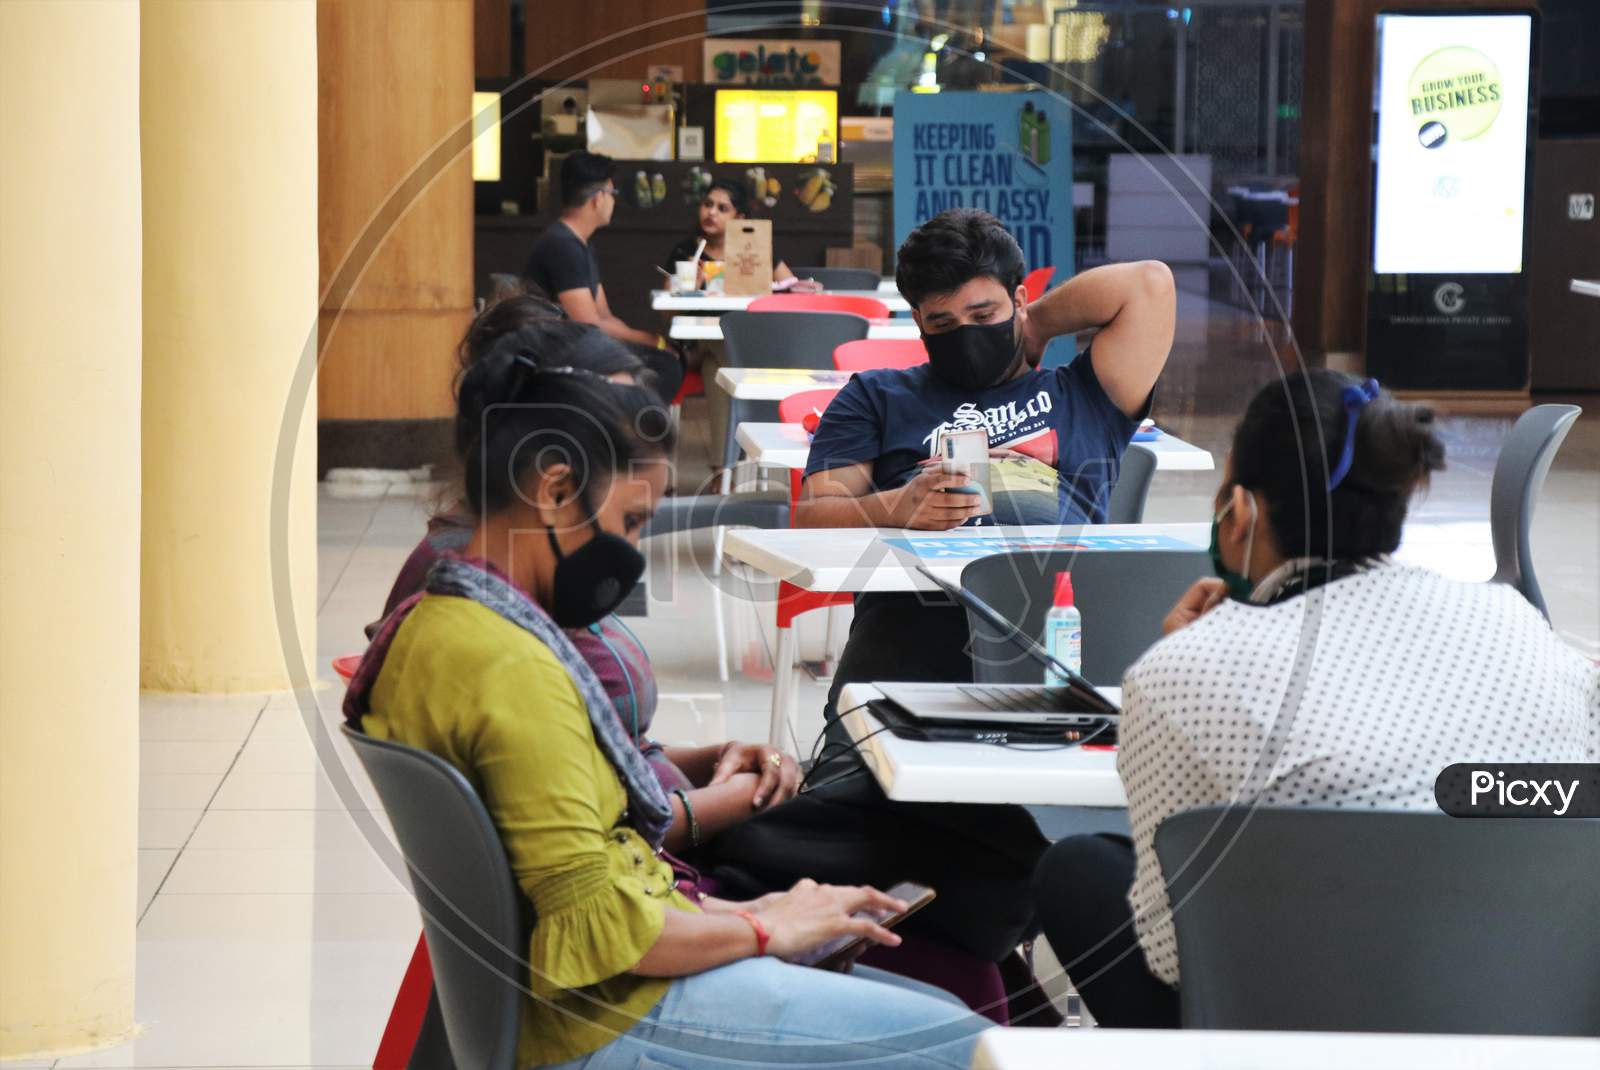 People are seen at a food court at a mall after they reopened amidst the spread of the coronavirus disease (COVID-19) in Mumbai, India on October 13, 2020.